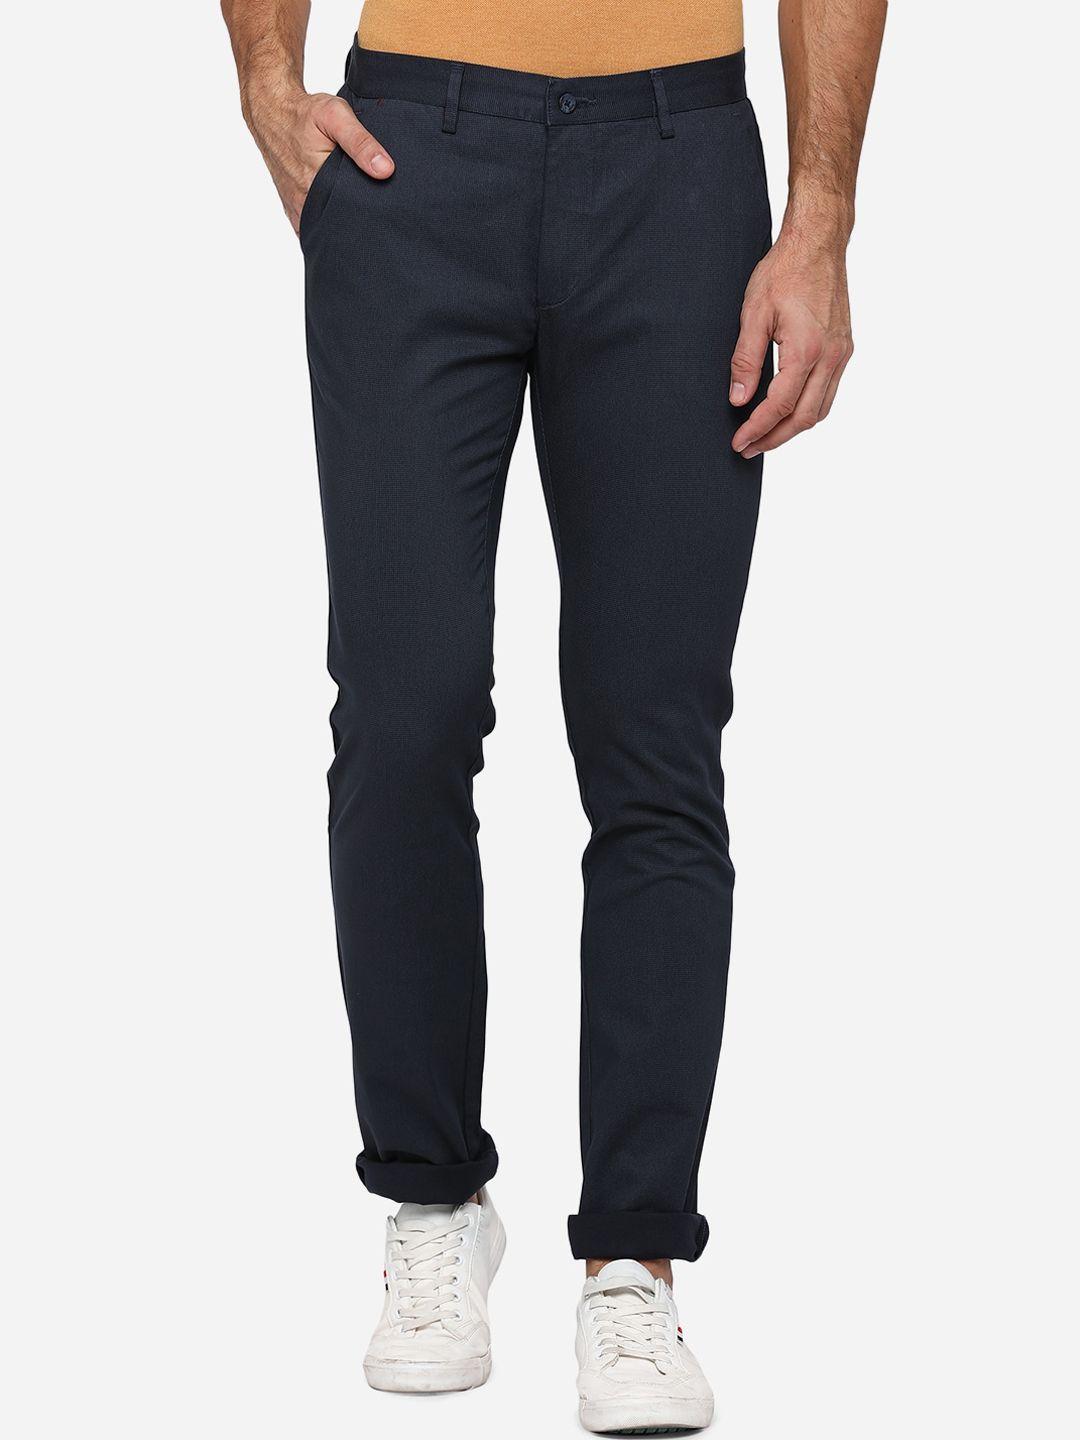 greenfibre men navy blue slim fit cotton chinos trousers